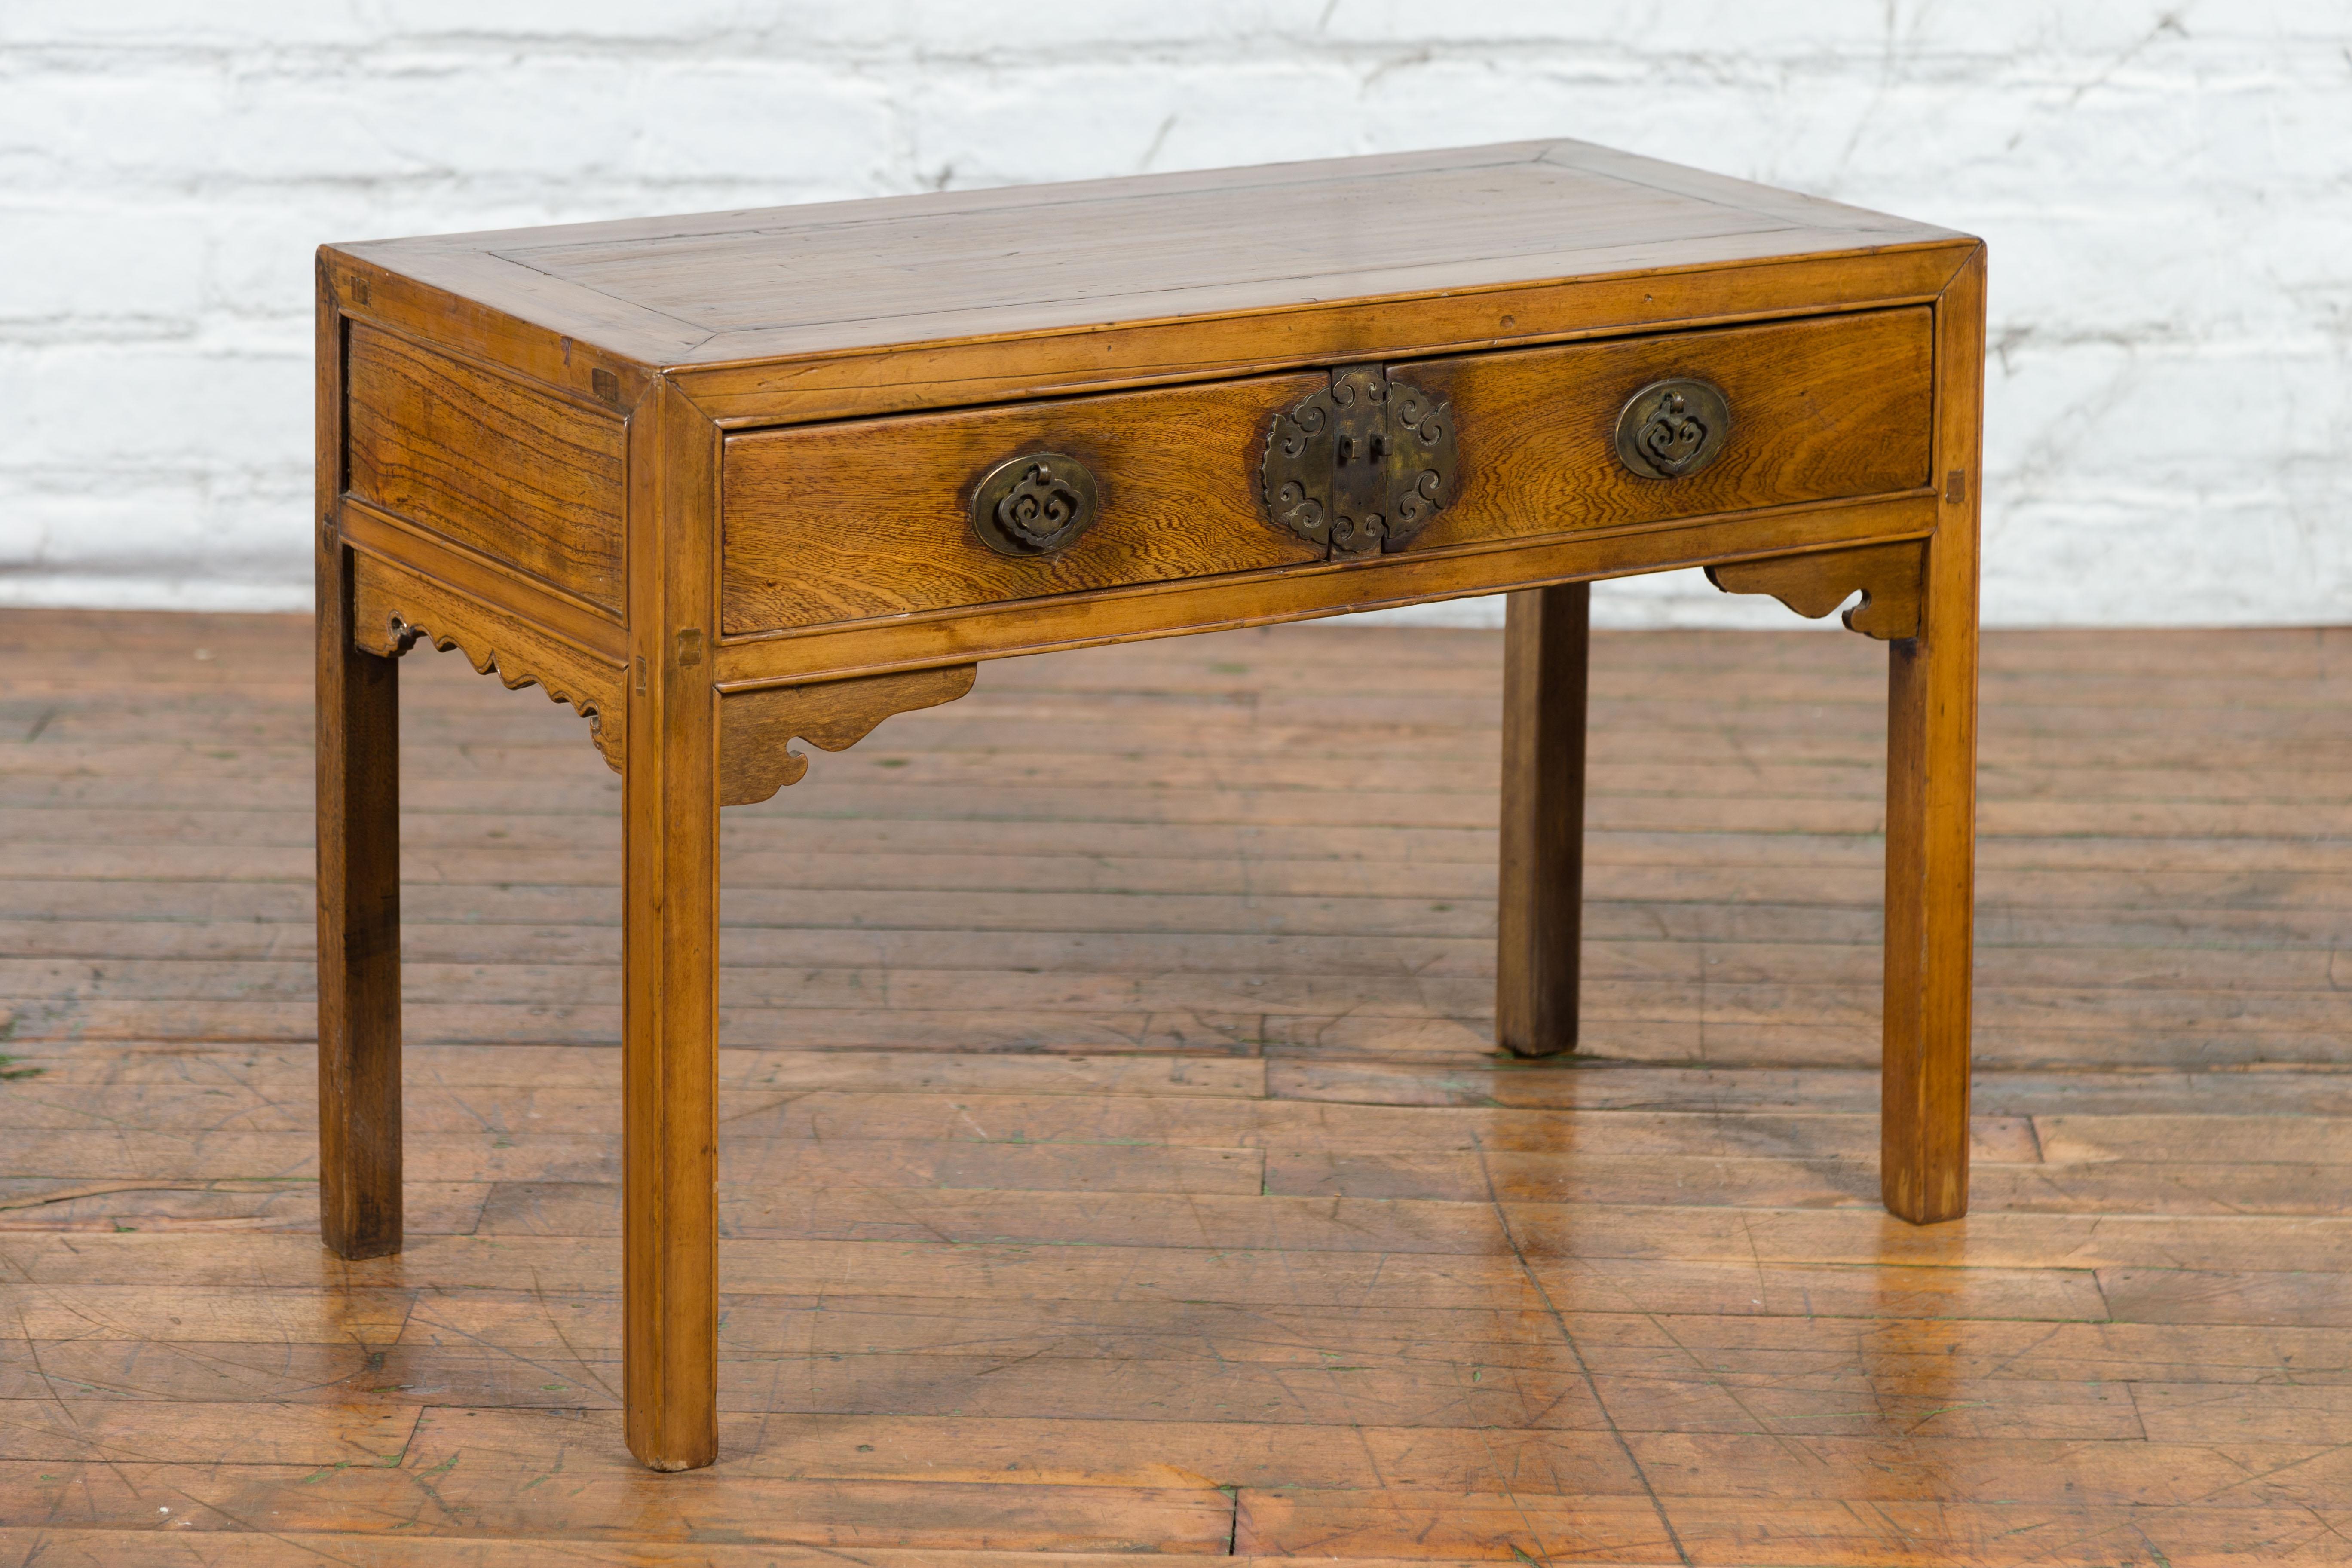 Chinese Late Qing Dynasty Elm Desk with Two Drawers and Ornate Brass Hardware For Sale 9